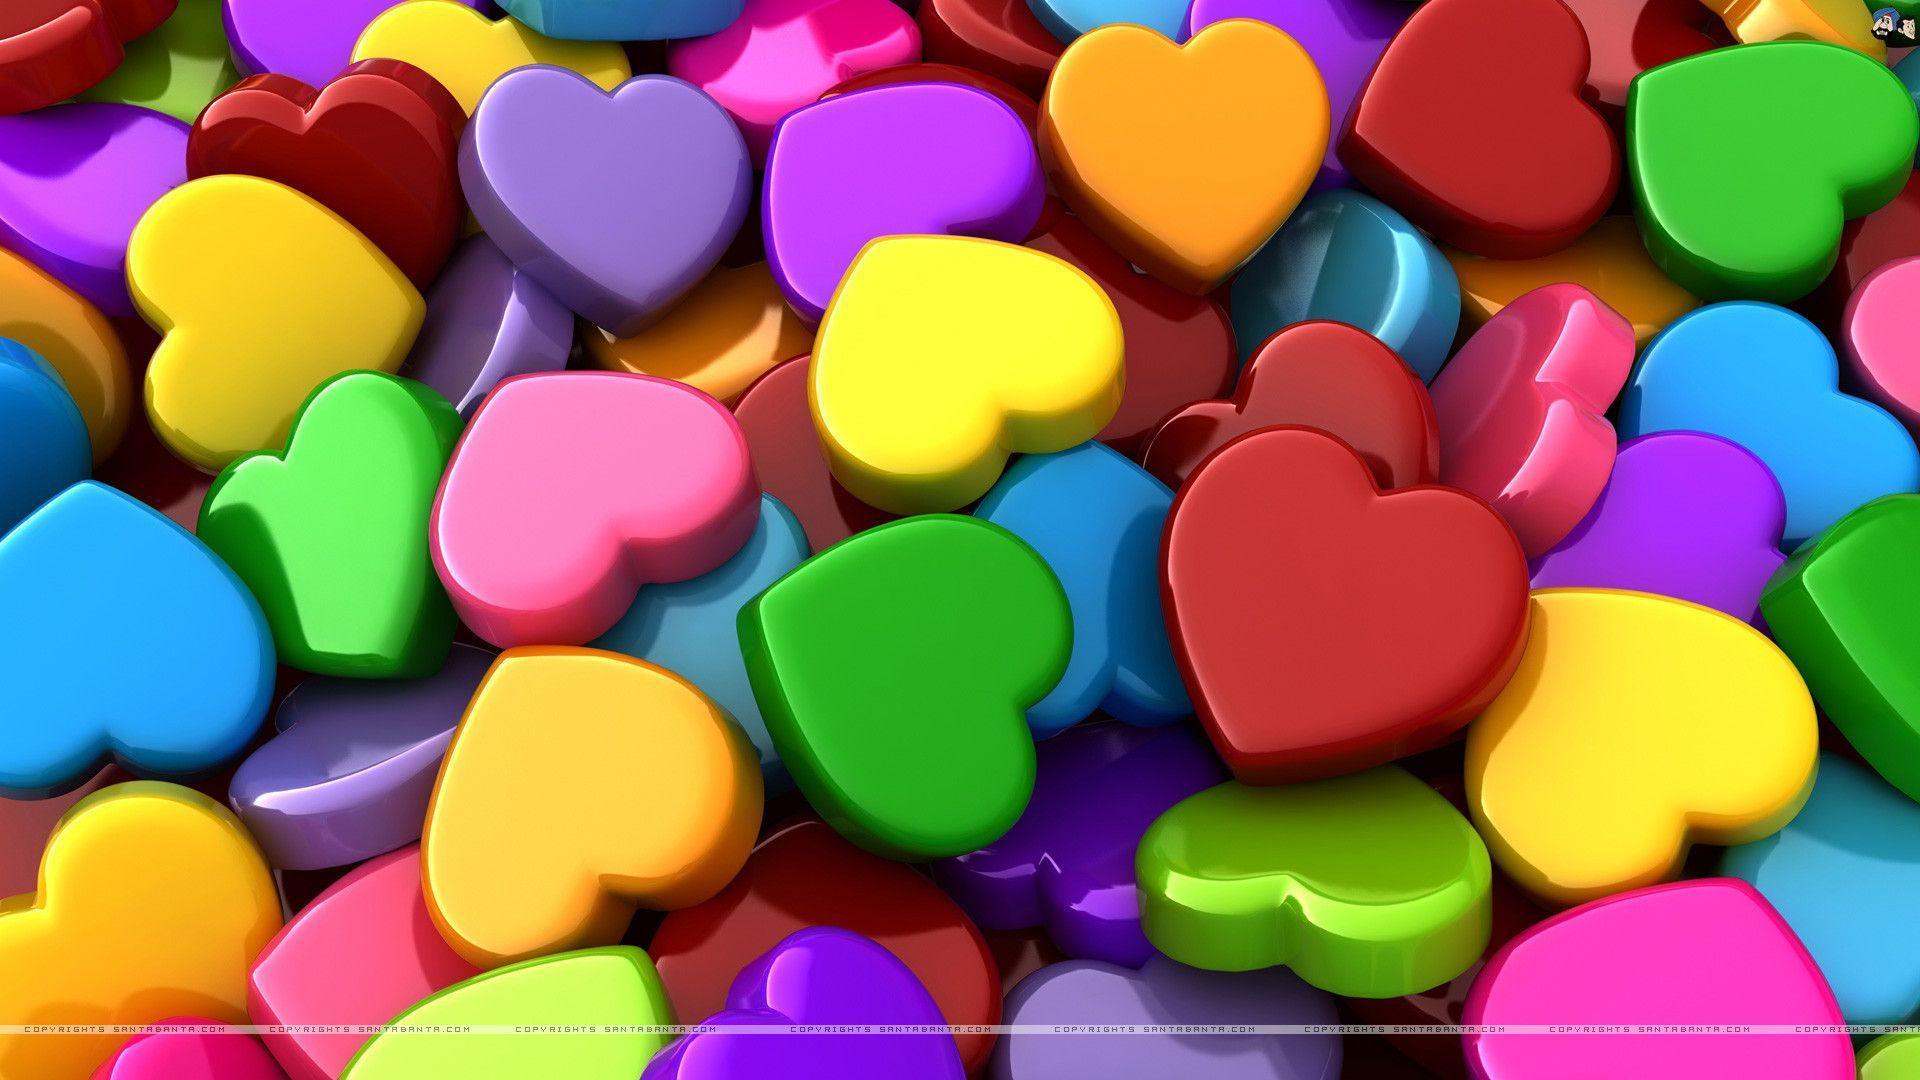 colorful heart background  pink heart και wallpaper  Heart background  Heart art print Valentines wallpaper